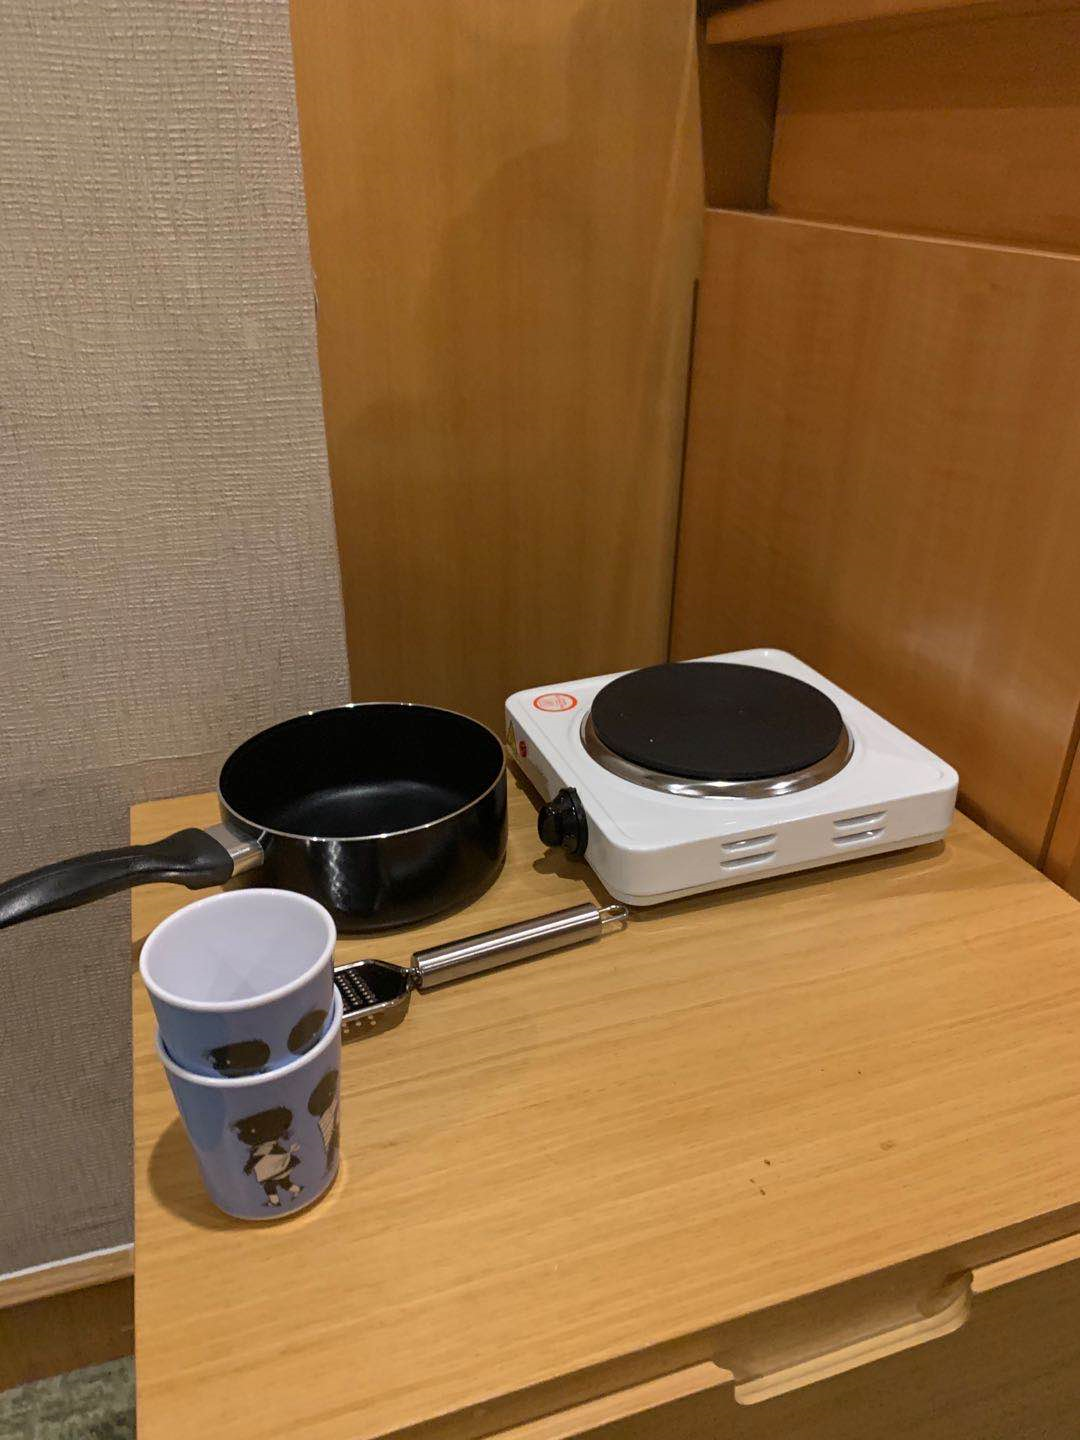 portable electric burner for cooking quarantine food in China